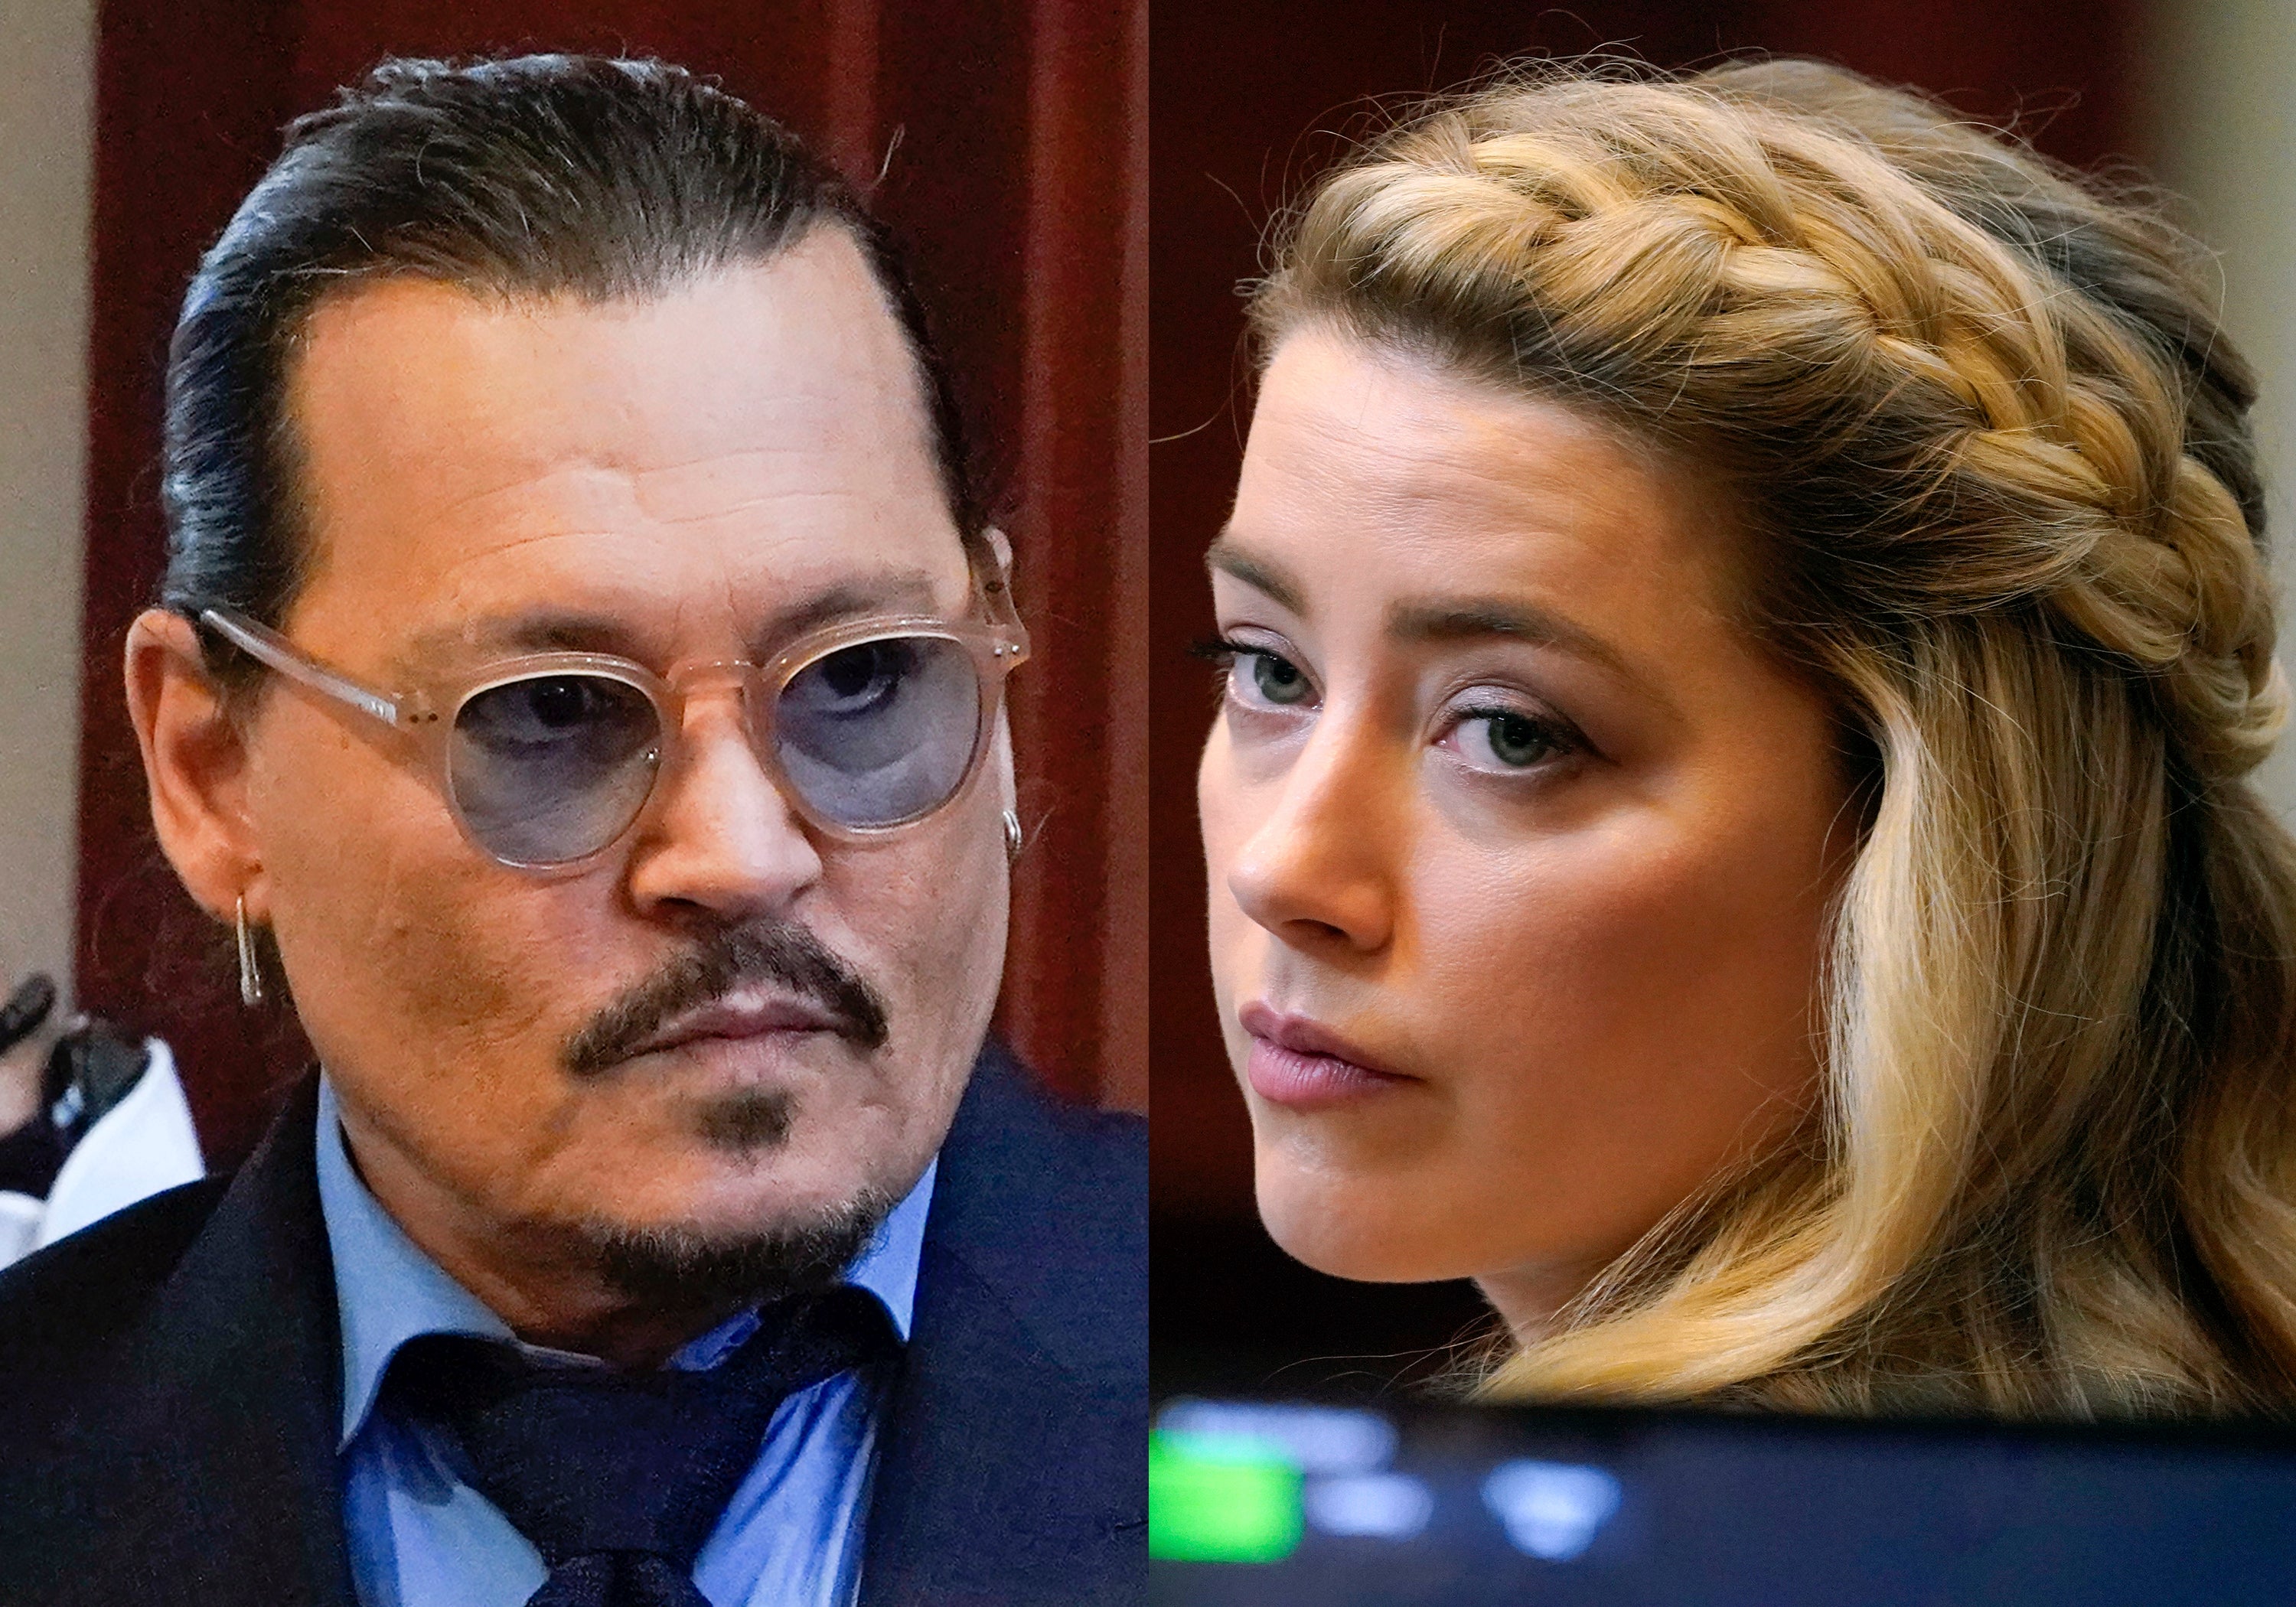 Johnny Depp Vs Amber Heard How Both Actors Each Made Their Case For